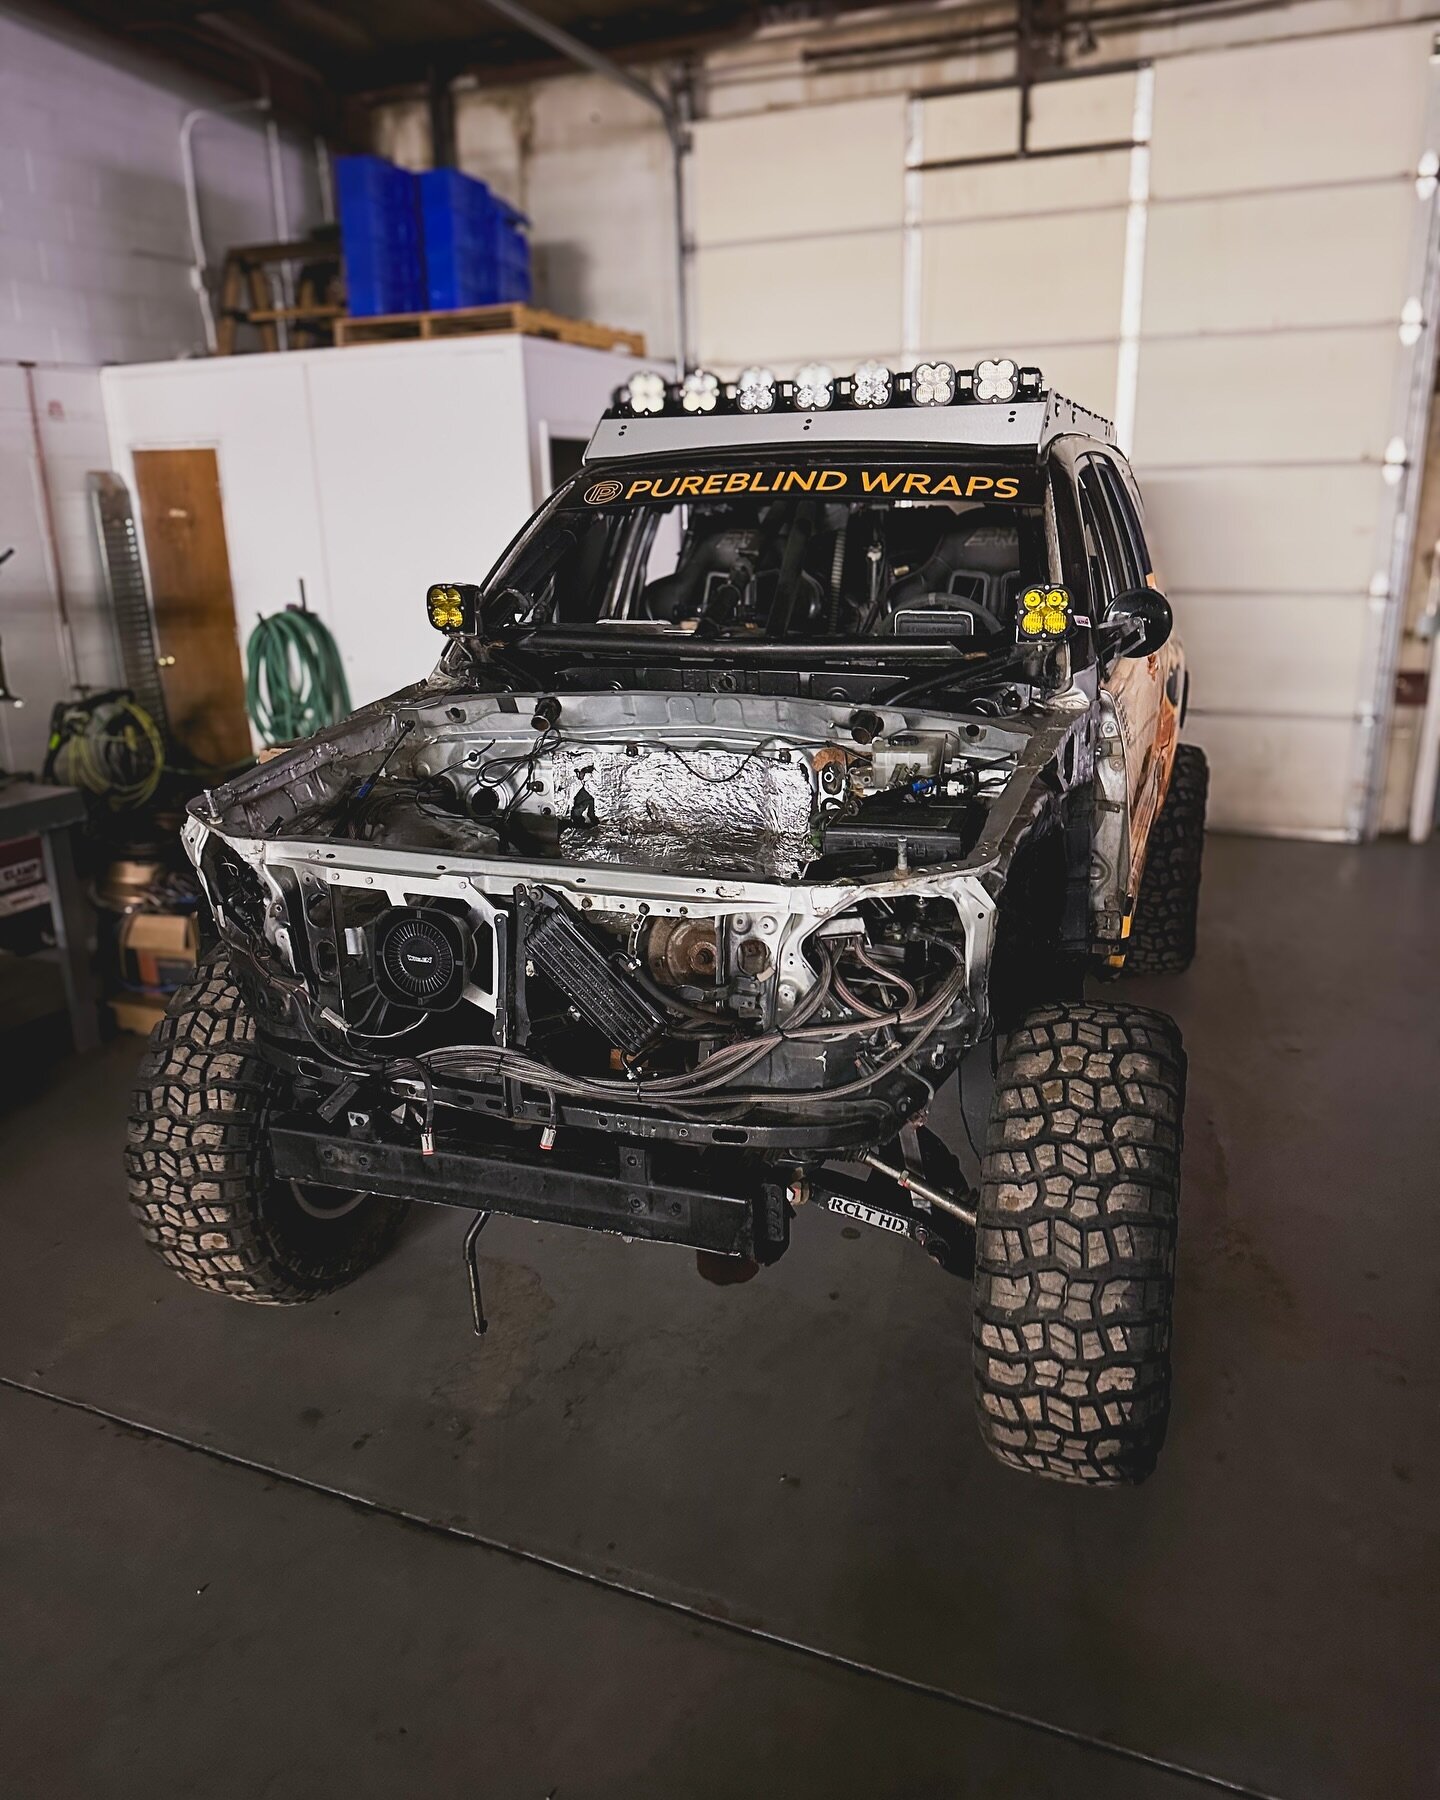 Currently&hellip;

Last year we tore down a whole lot further than this. Thankfully this year this is about as far as we have to go. Now to start the fab work!

____________________________________
Race team based in Colorado, pushing a 4Runner to it